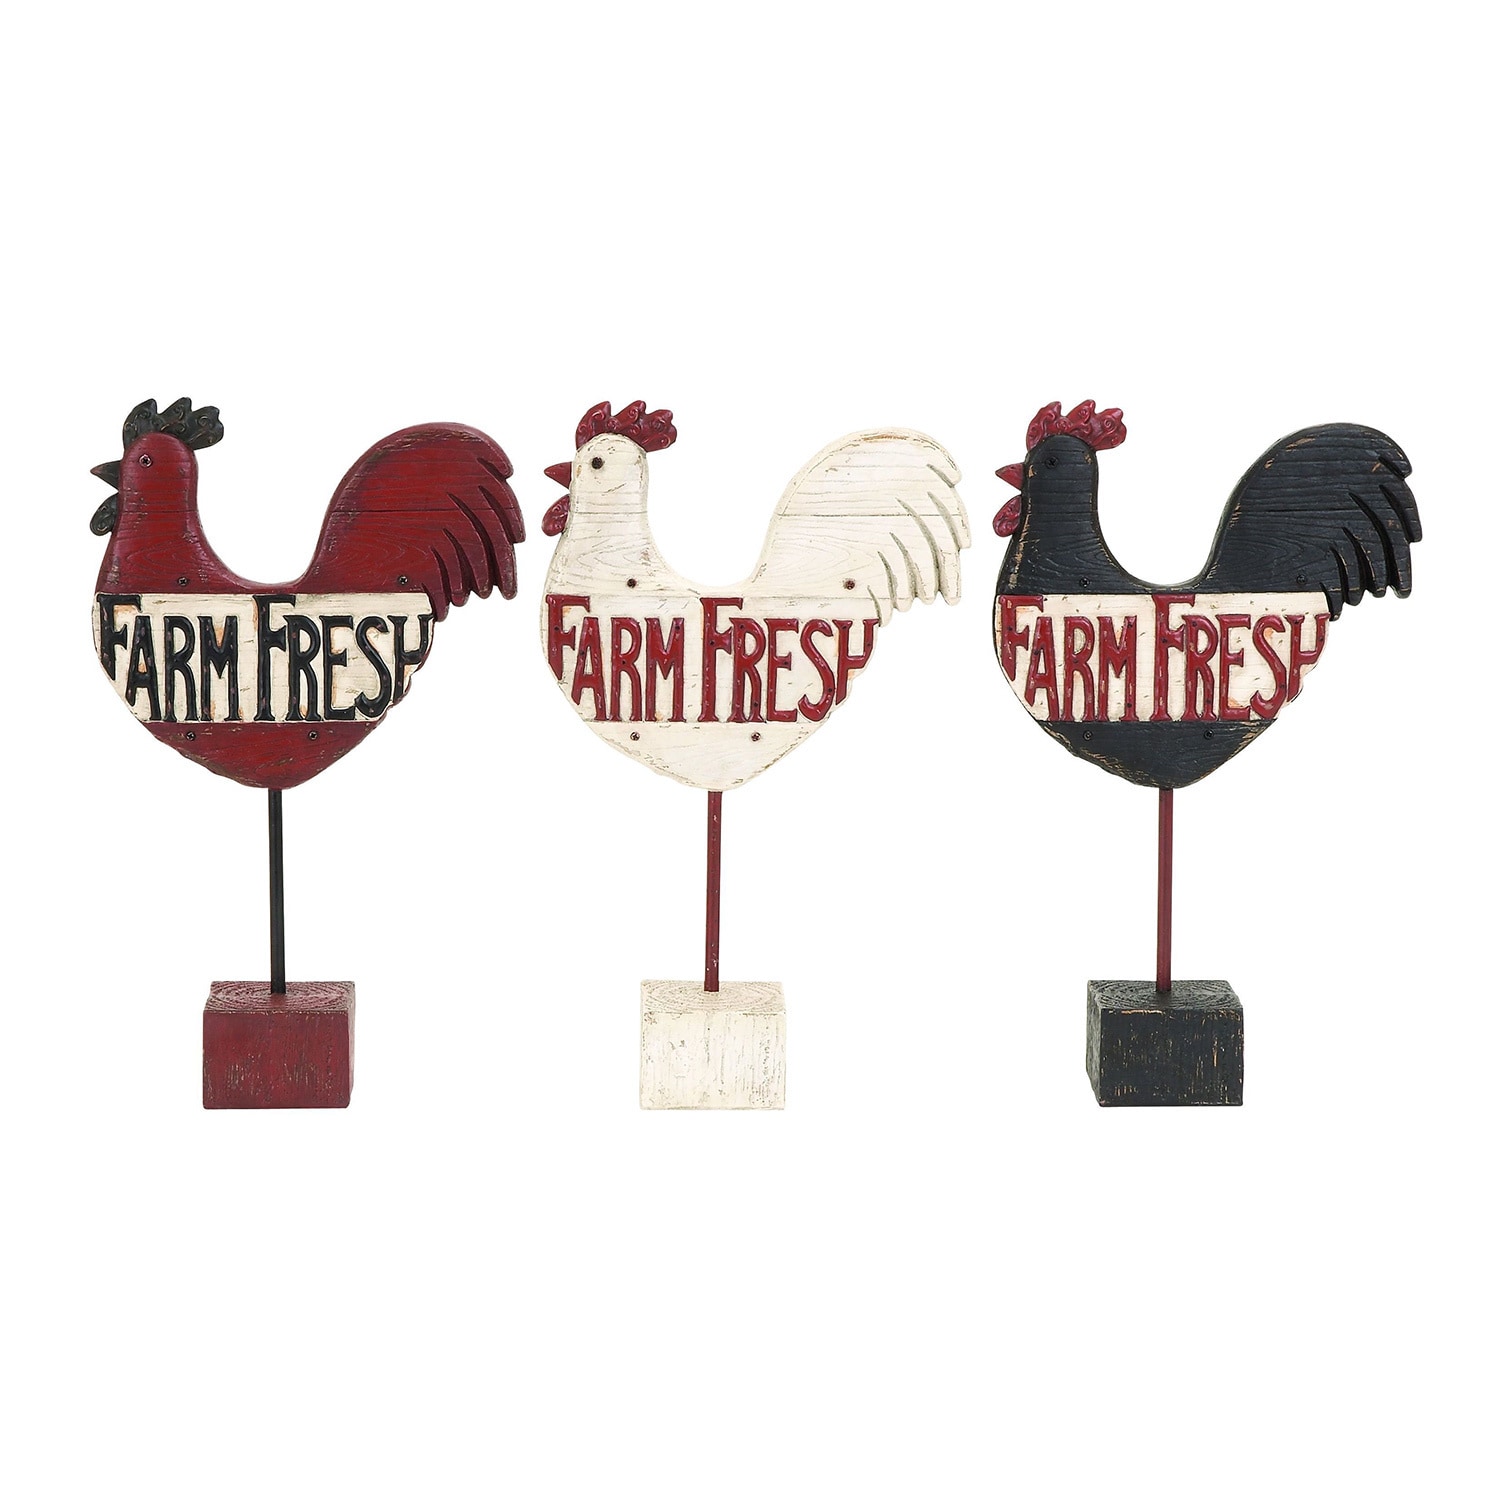 Assorted Kitchen Polystone Rooster Farm Fresh Sign